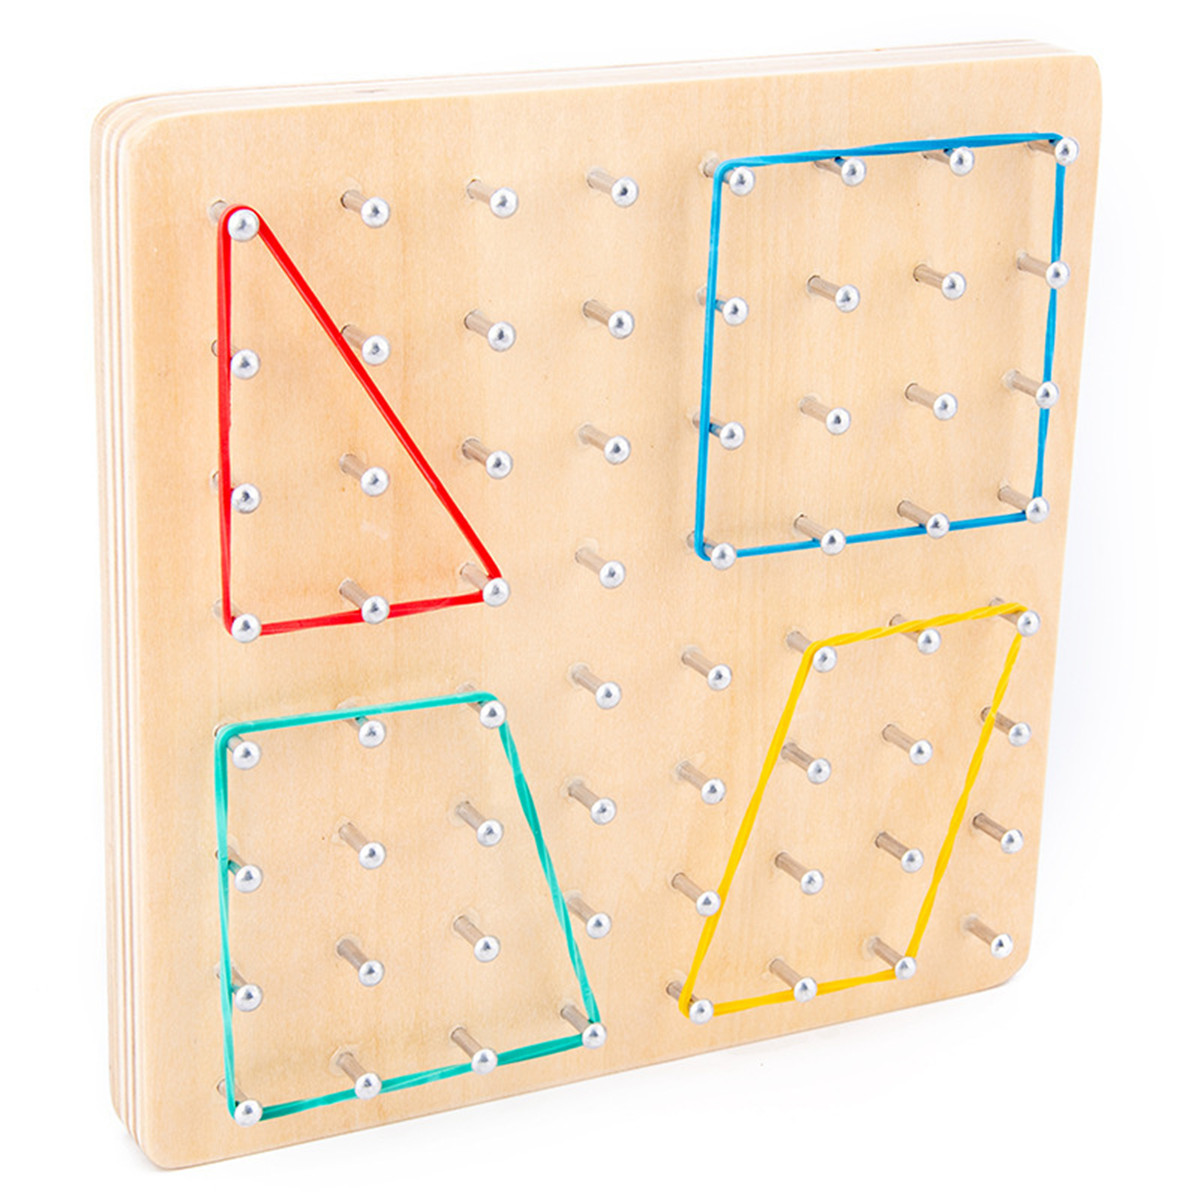 Montessori-Traditional-Teaching-Geometry-Puzzle-Pattern-Educational-School-Home-Game-Toy-for-Kids-Gi-1726969-8